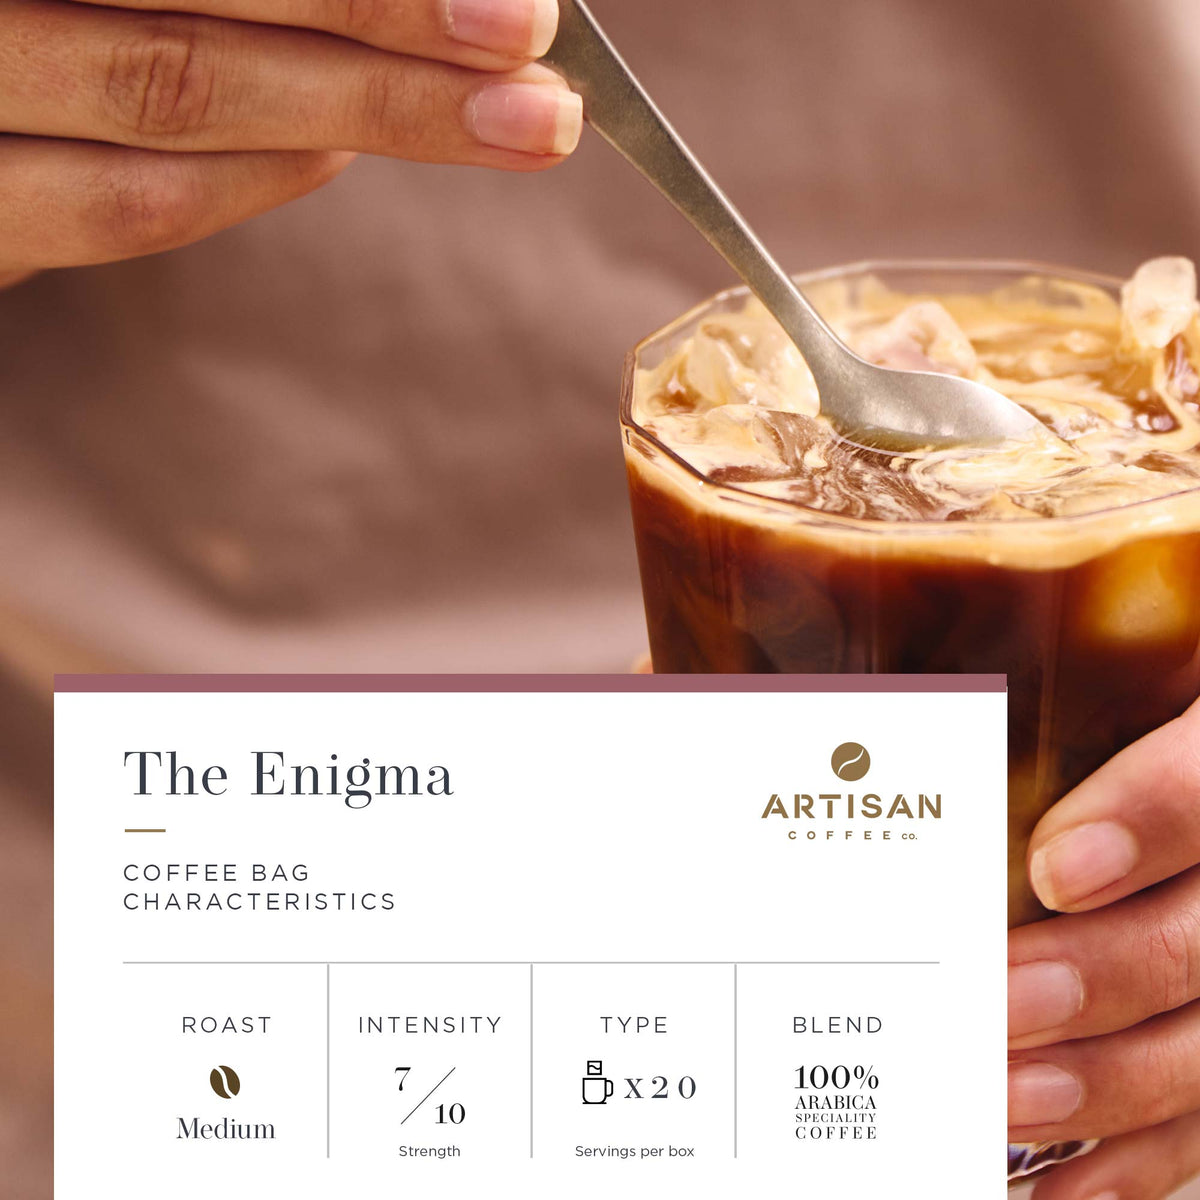 Artisan Coffee Co The Enigma Coffee bags Infographic characteristics